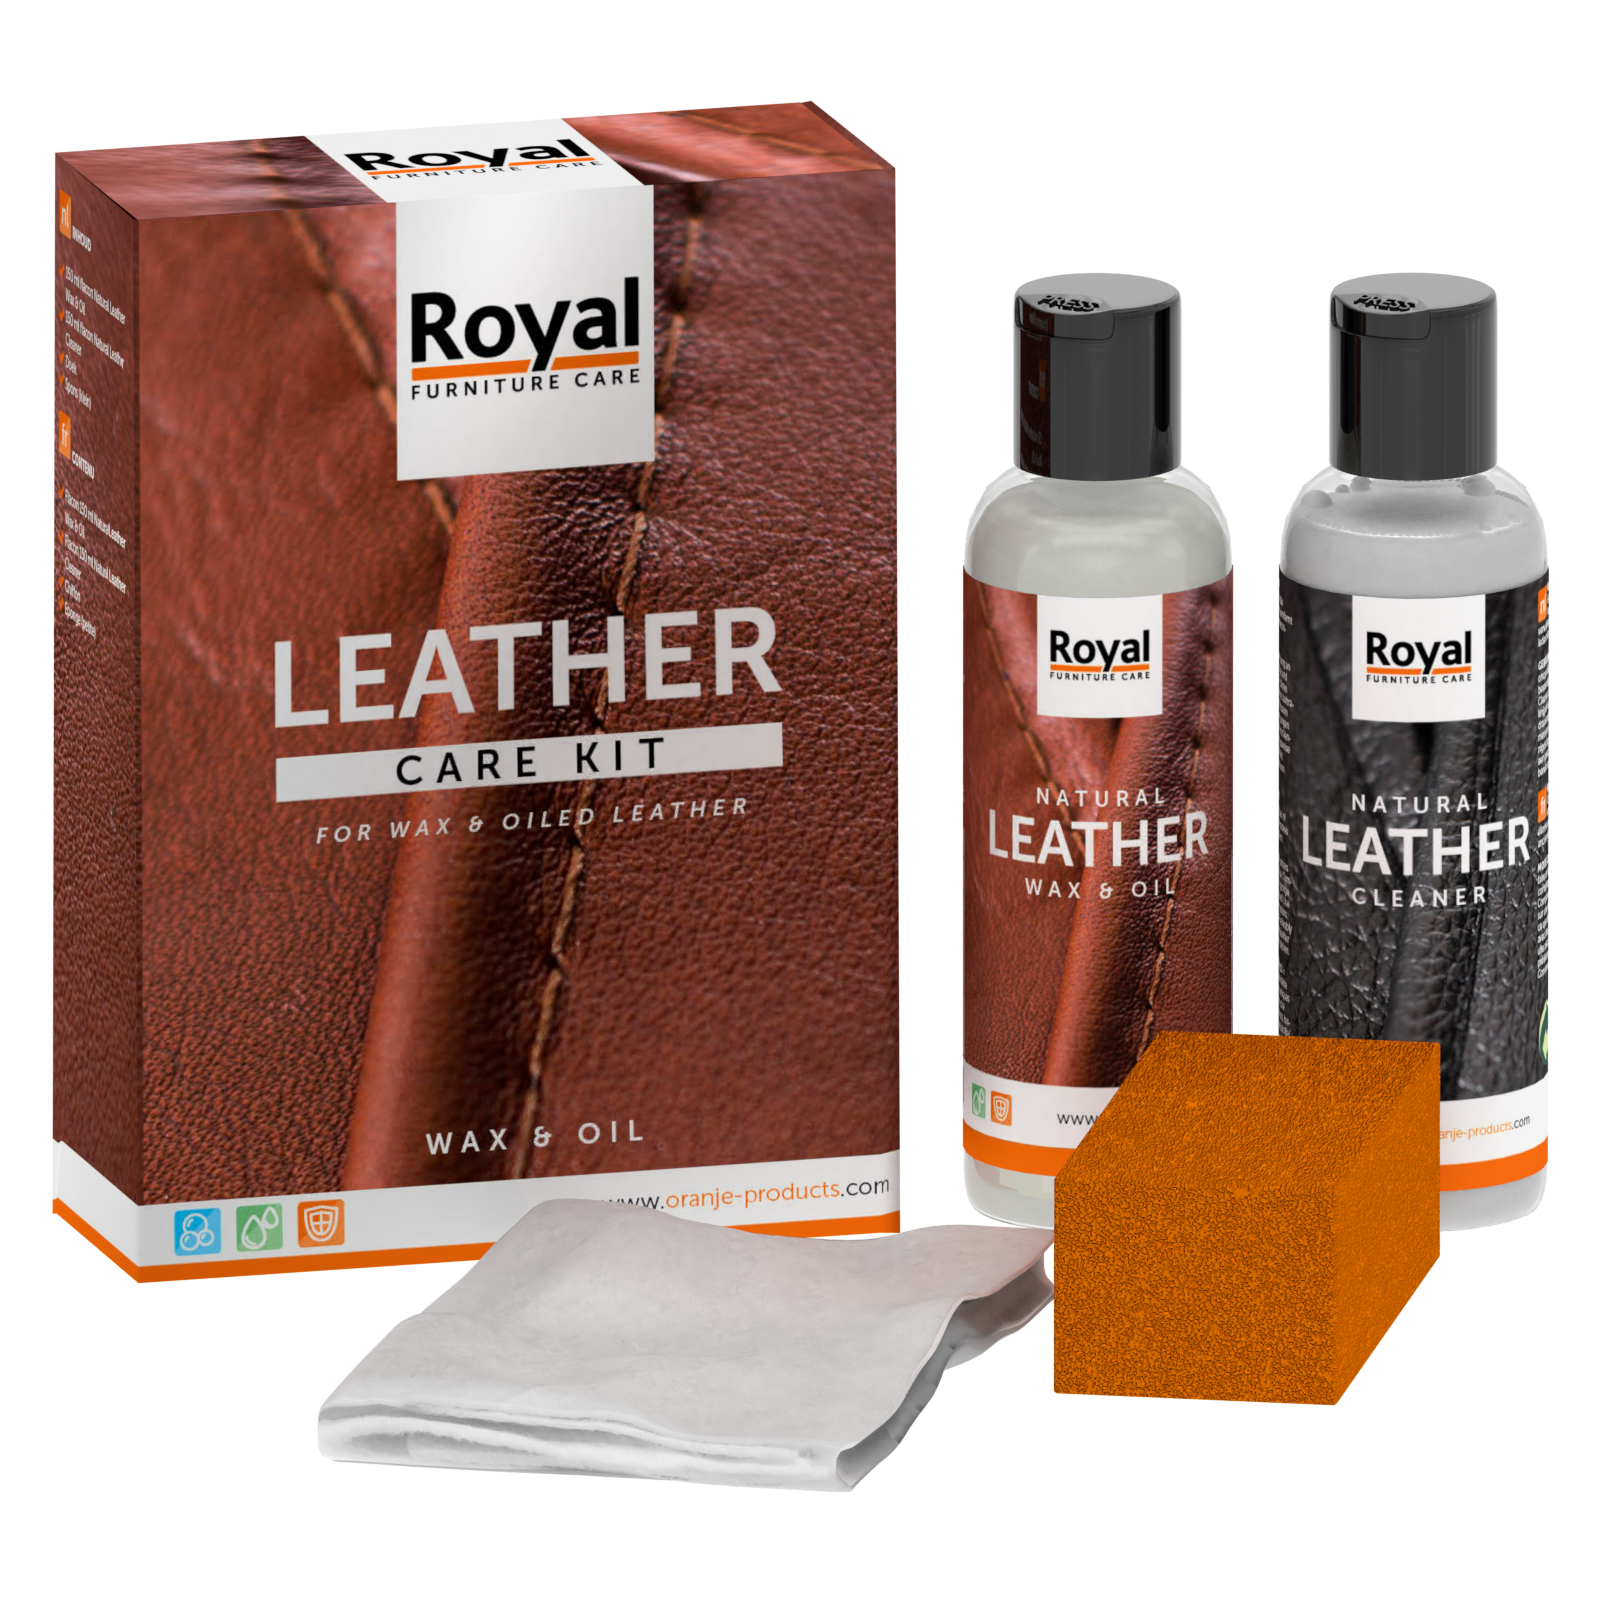 Leather care kit - Wax & Oil